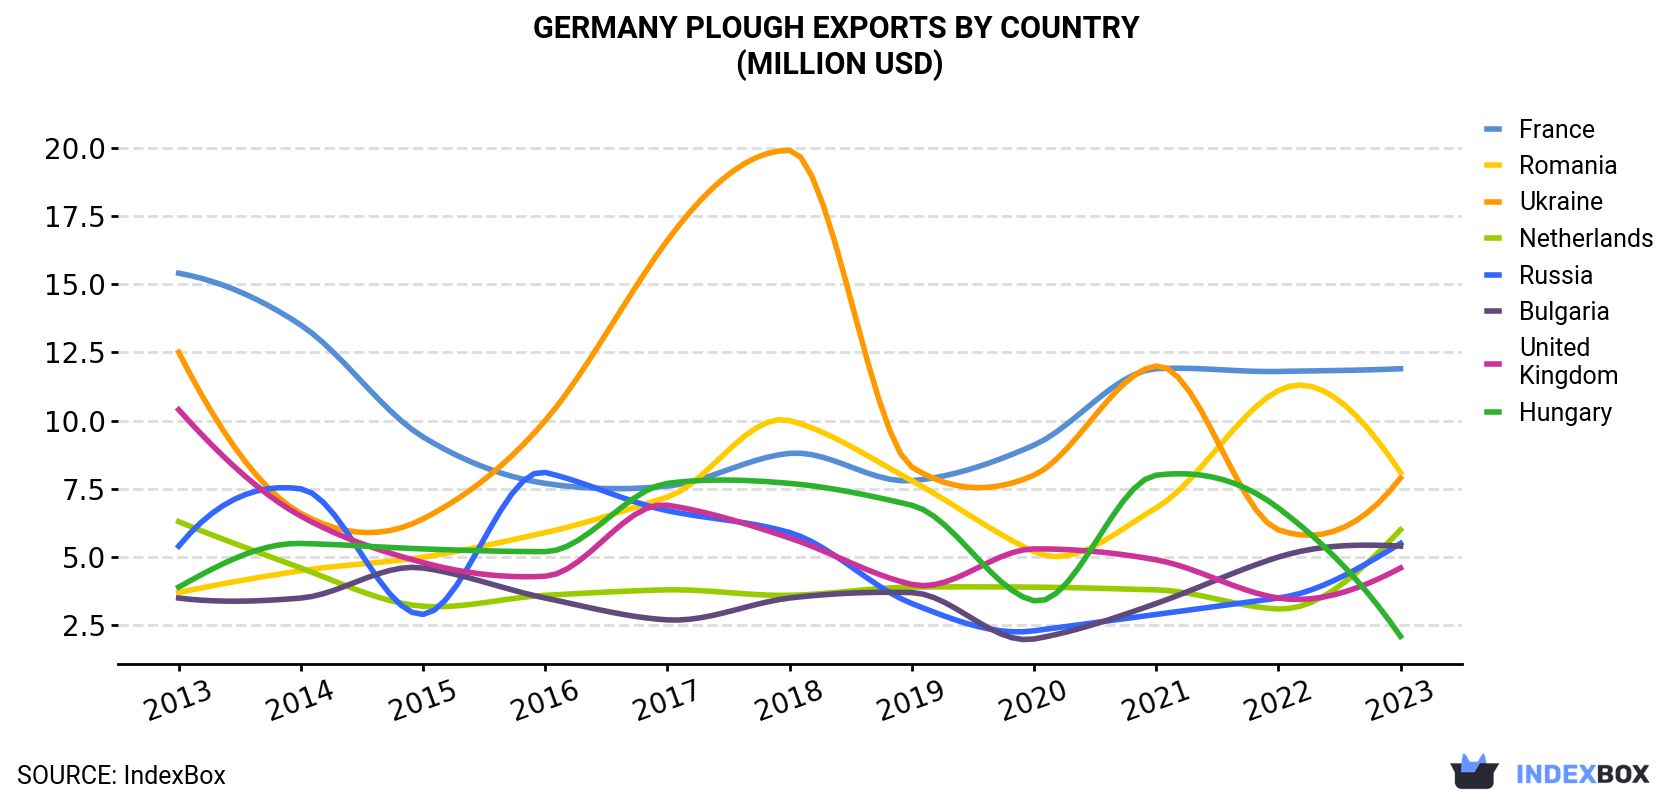 Germany Plough Exports By Country (Million USD)